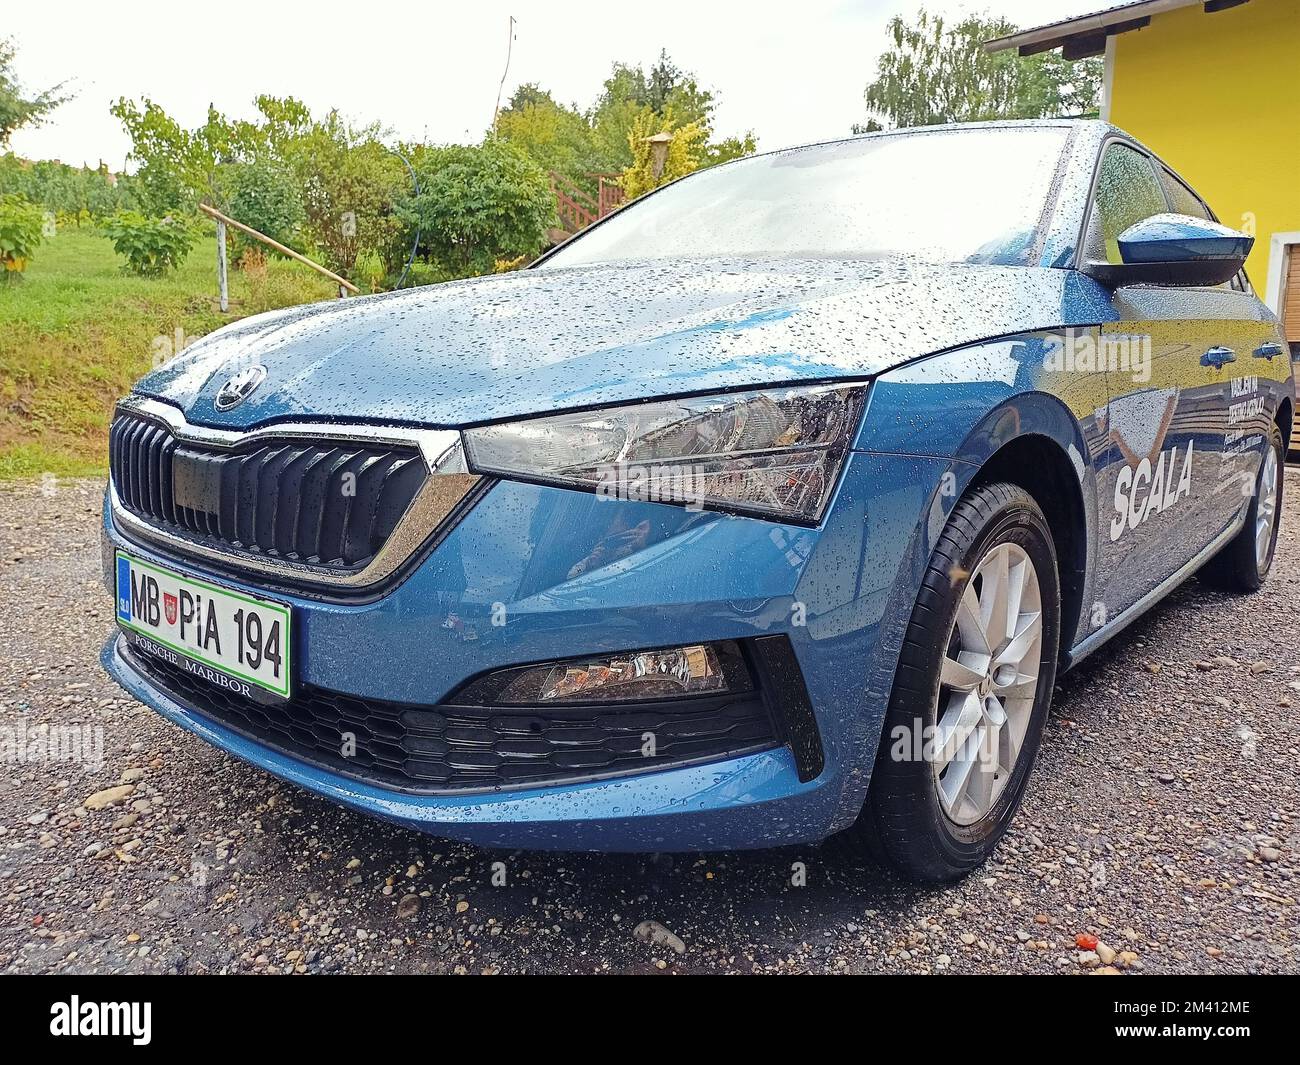 A front view of a blue Skoda Scala 2021 parked on the street Stock Photo